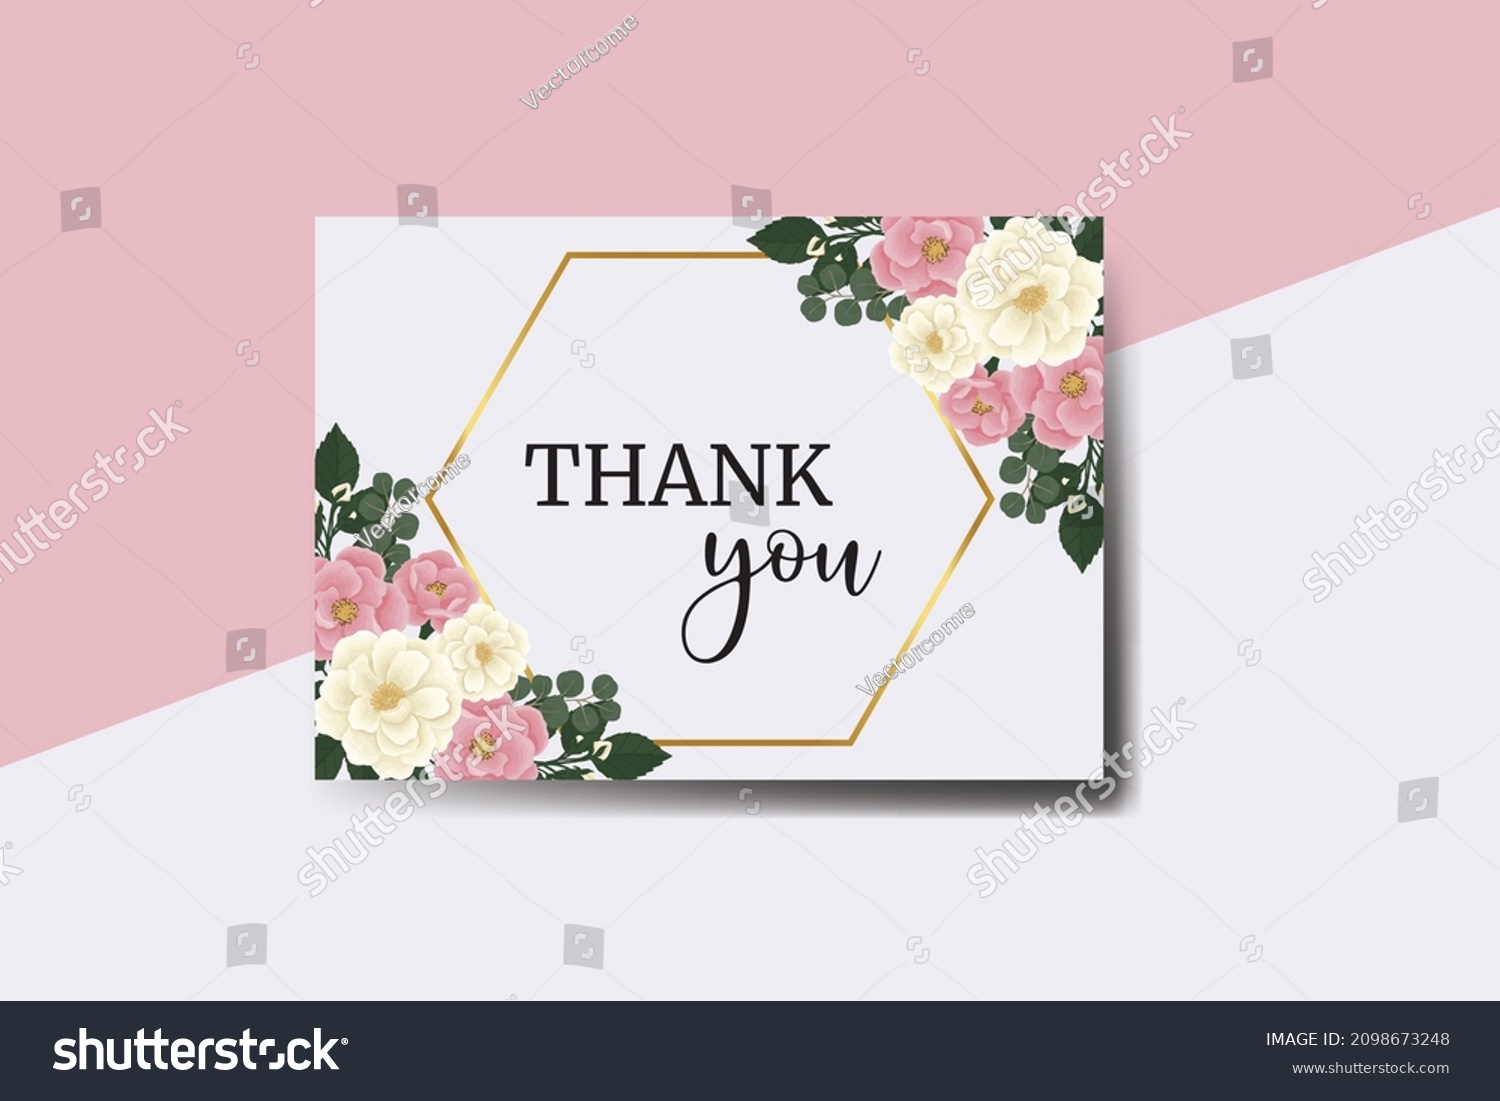 SVG of Thank you card Greeting Card Pink Mini Rose Flower Design Template svg